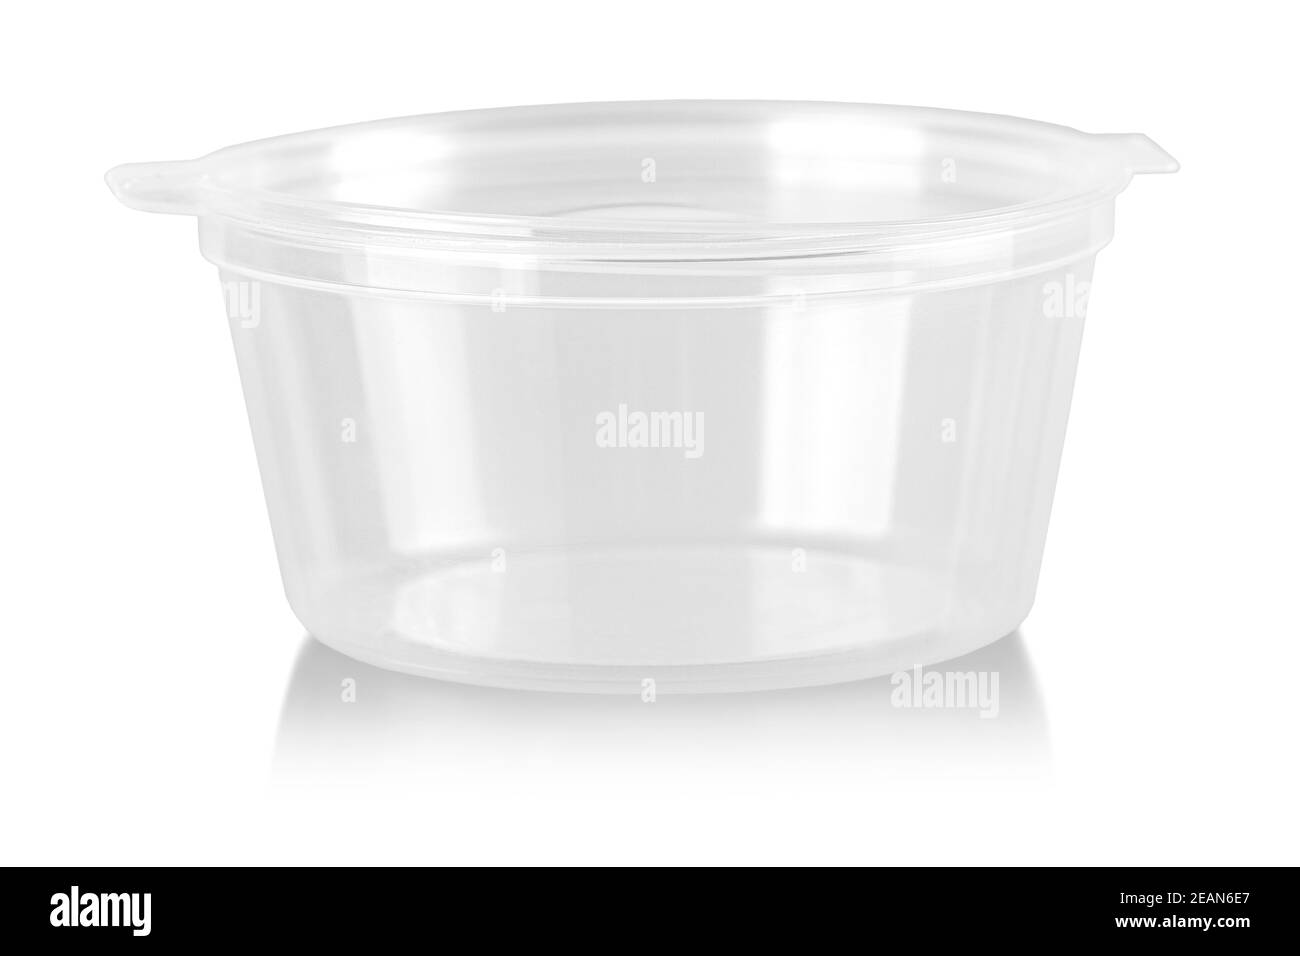 https://c8.alamy.com/comp/2EAN6E7/empty-plastic-container-isolated-on-white-background-2EAN6E7.jpg